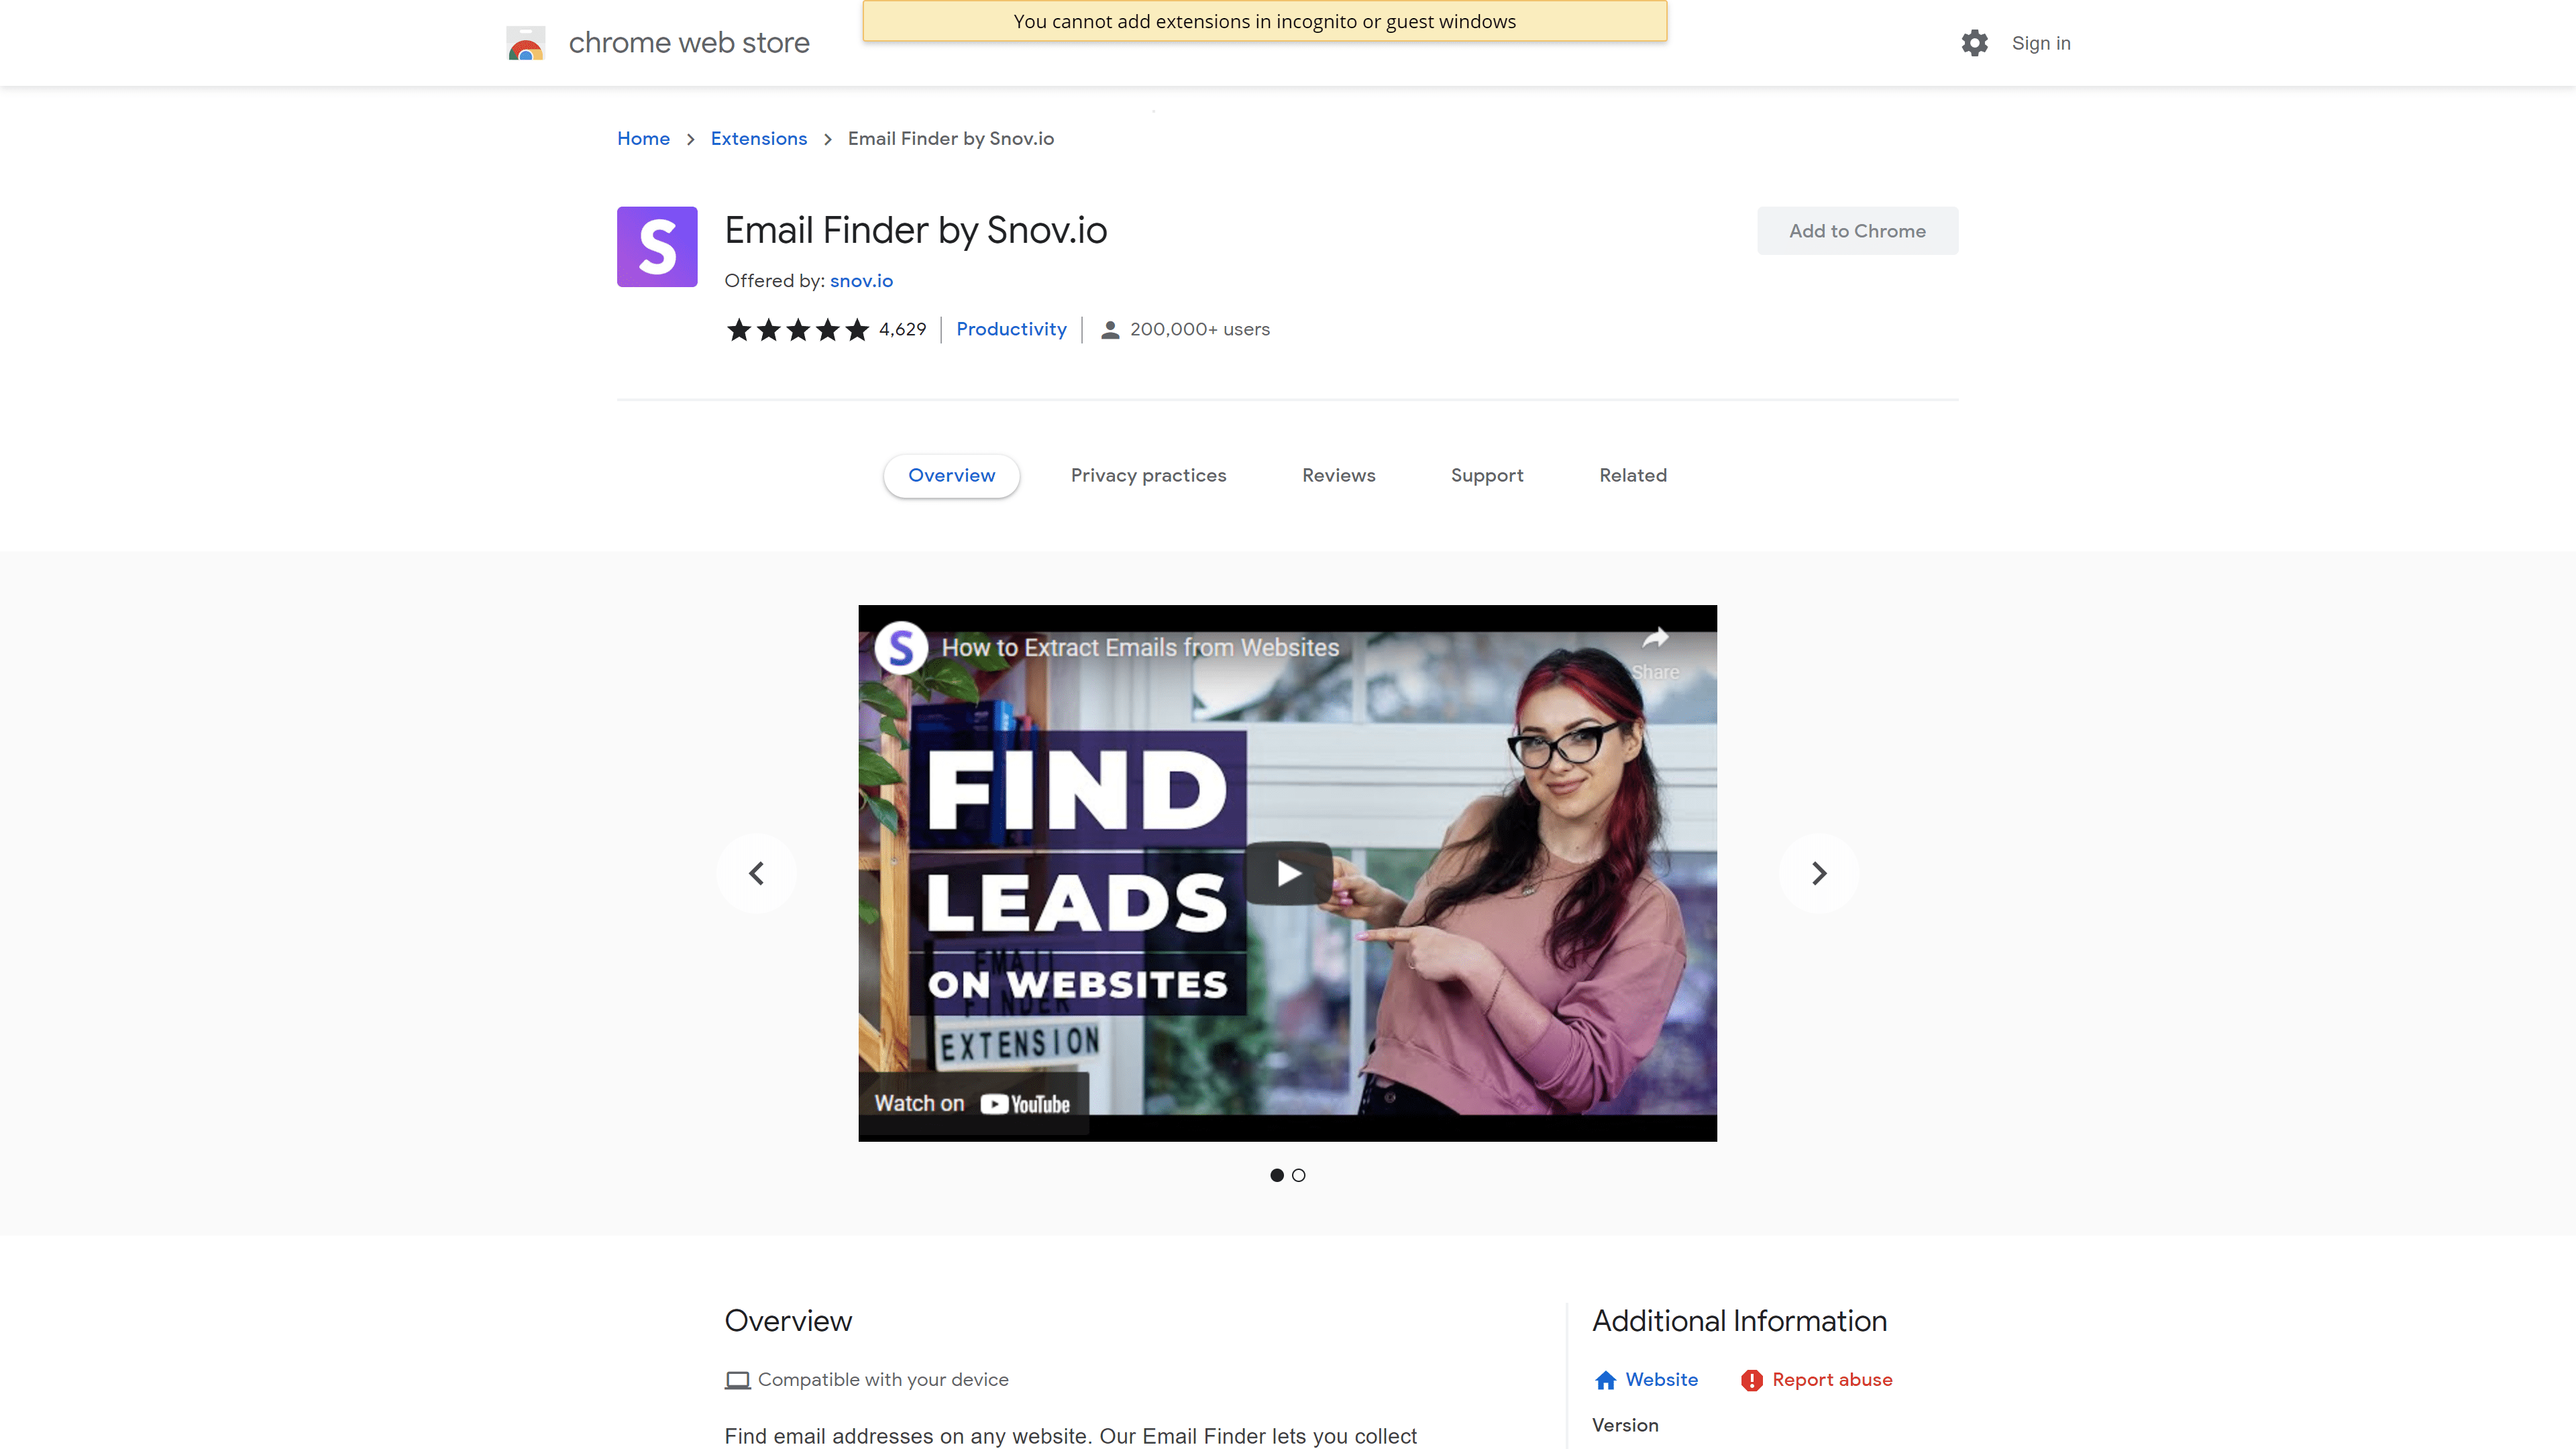 Email Finder by Snov.io